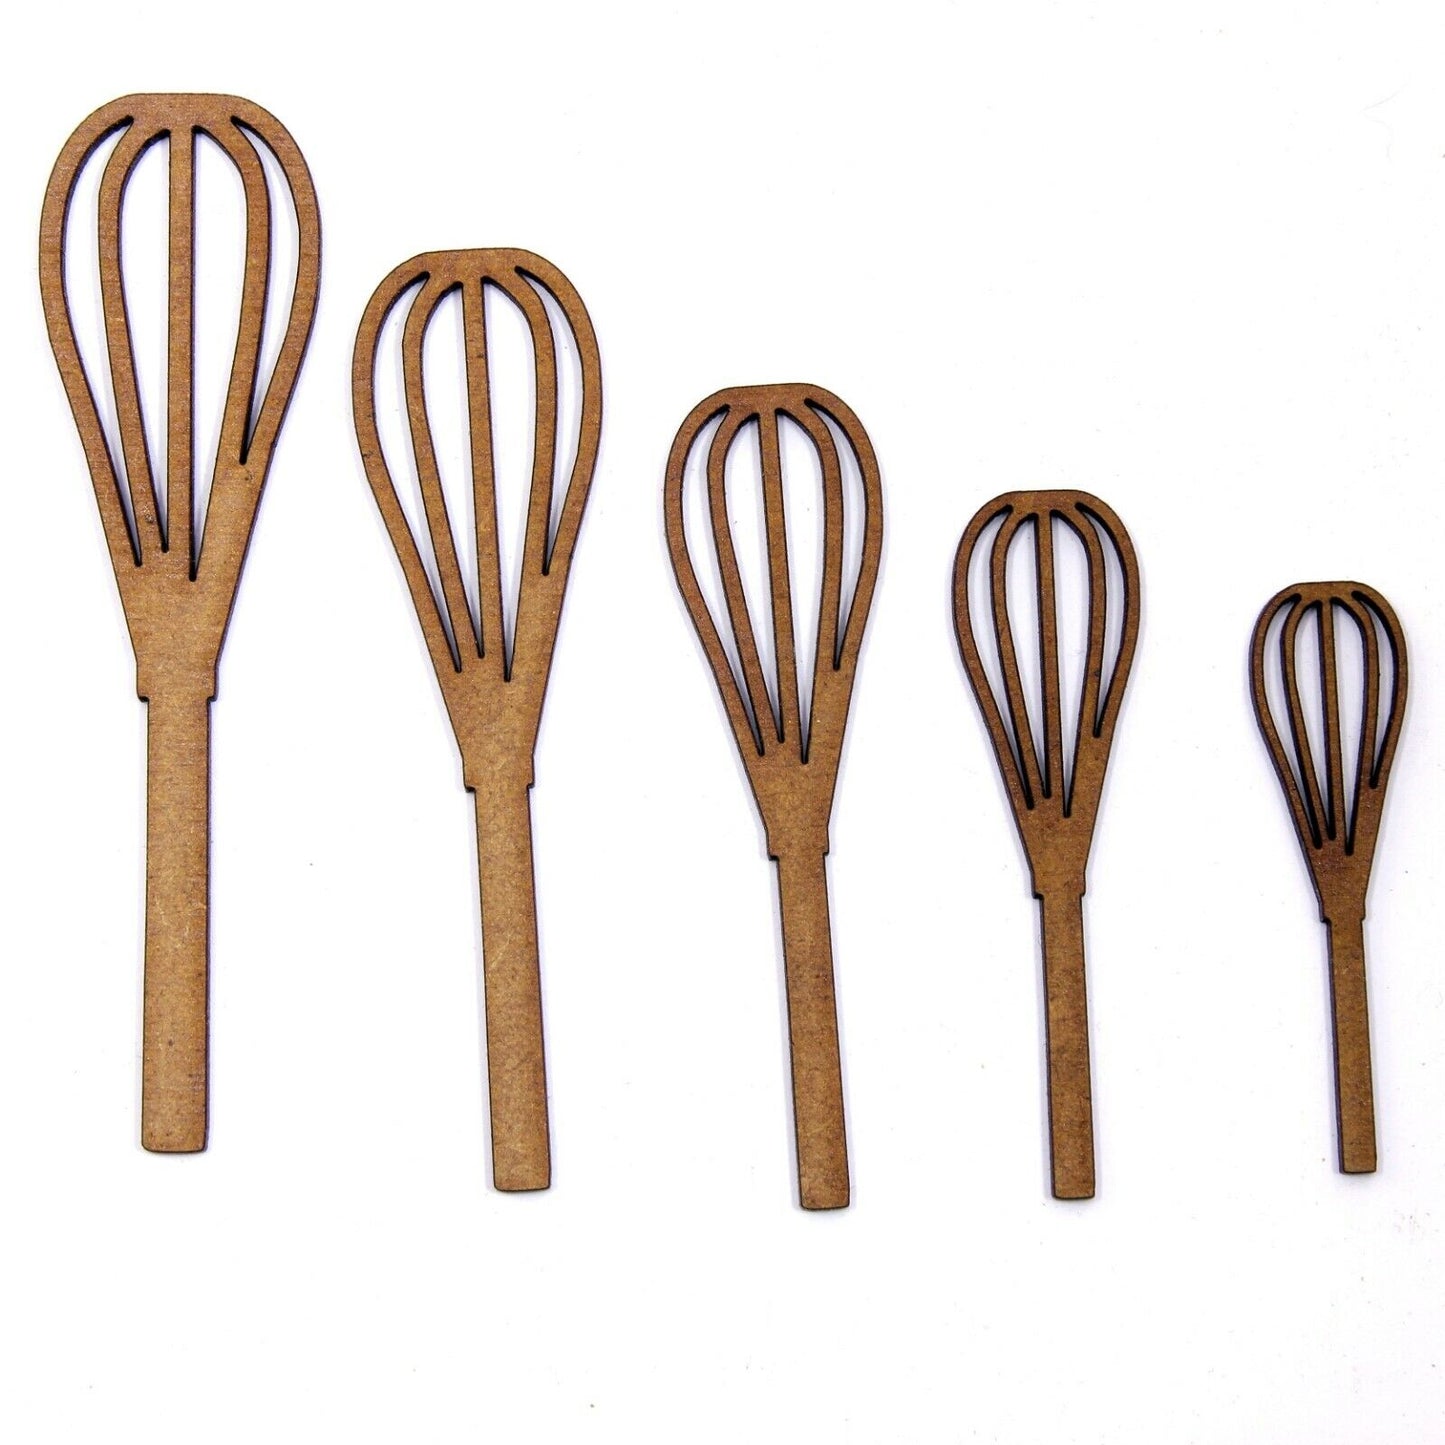 Whisk Craft Shape. 2mm MDF. Various Sizes. Baking, Cooking, Baker, Cook, Chef